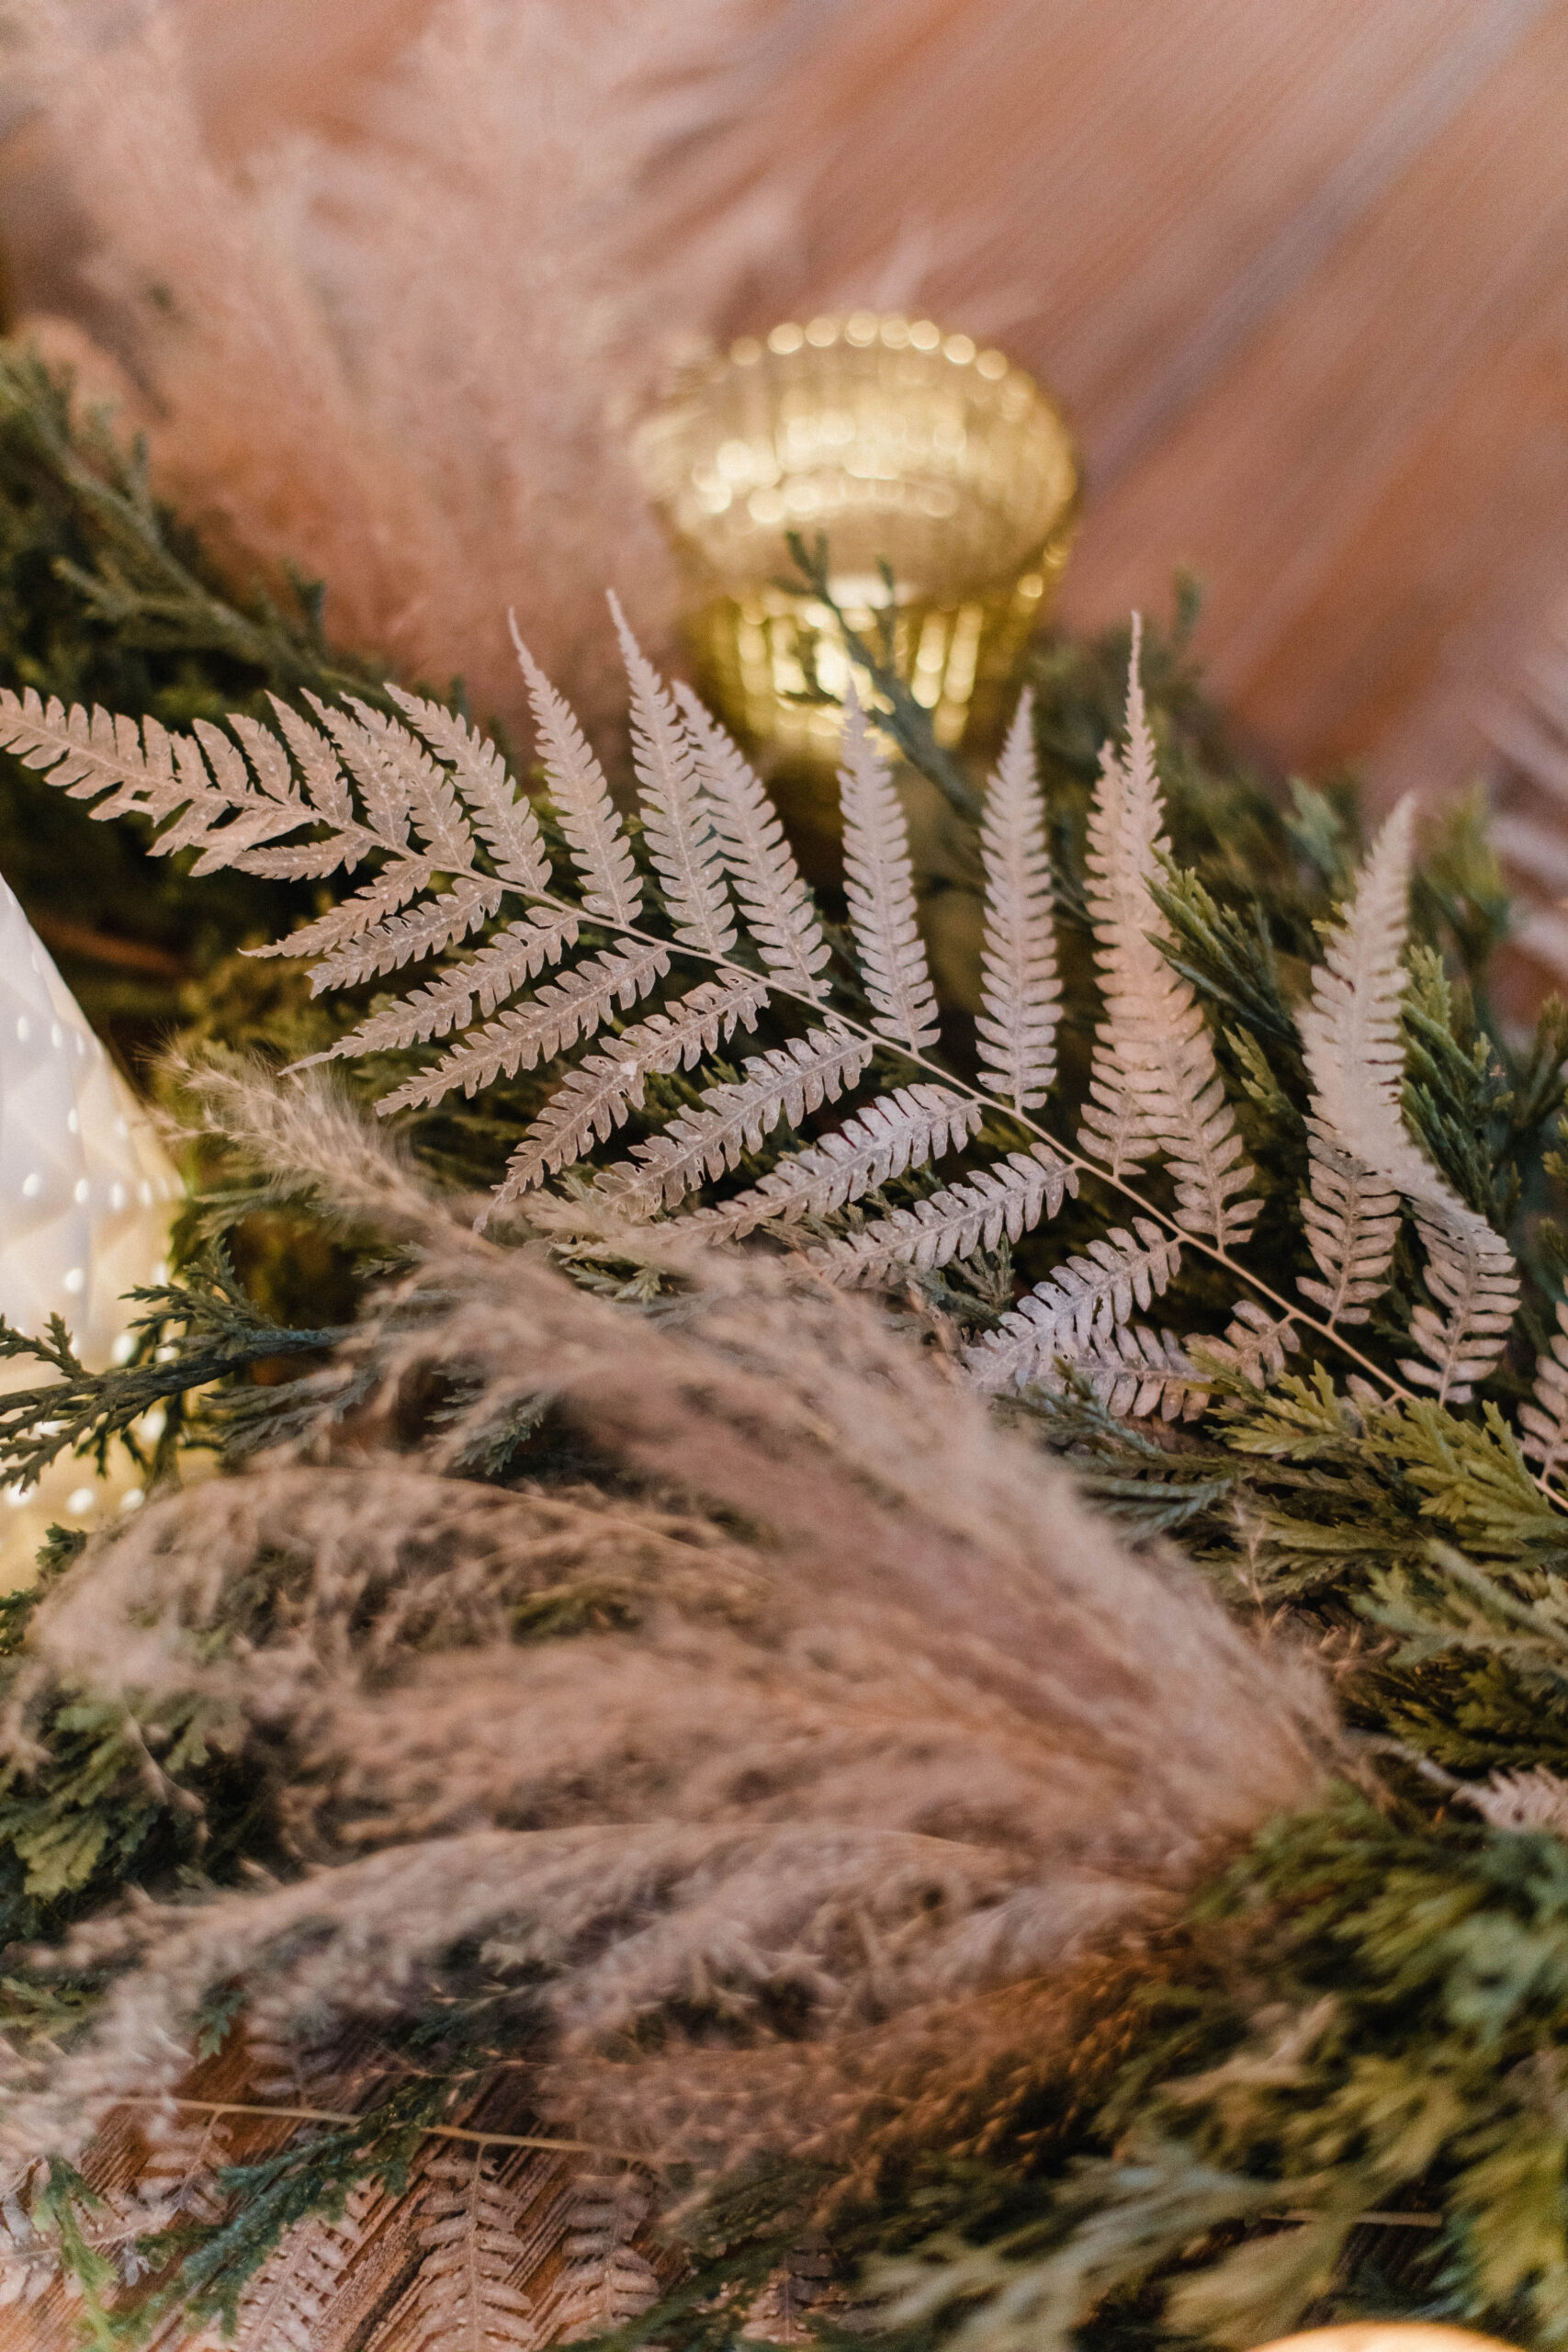 Connecticut life and style blogger Lauren McBride shares a romantic Christmas tablescape that's cozy and inviting for the season.